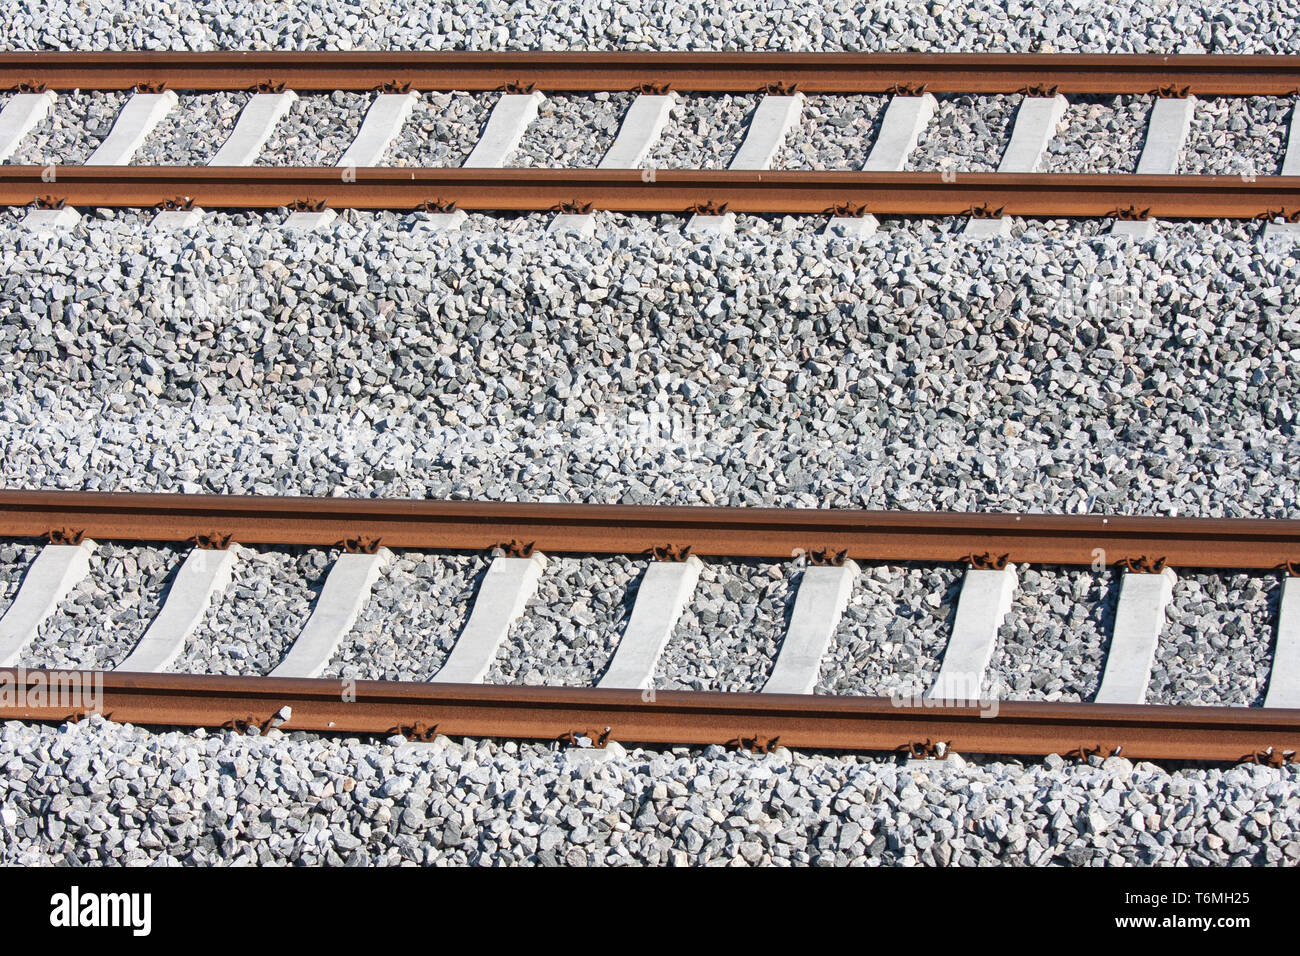 Tracks of a new railway in the netherlands Stock Photo